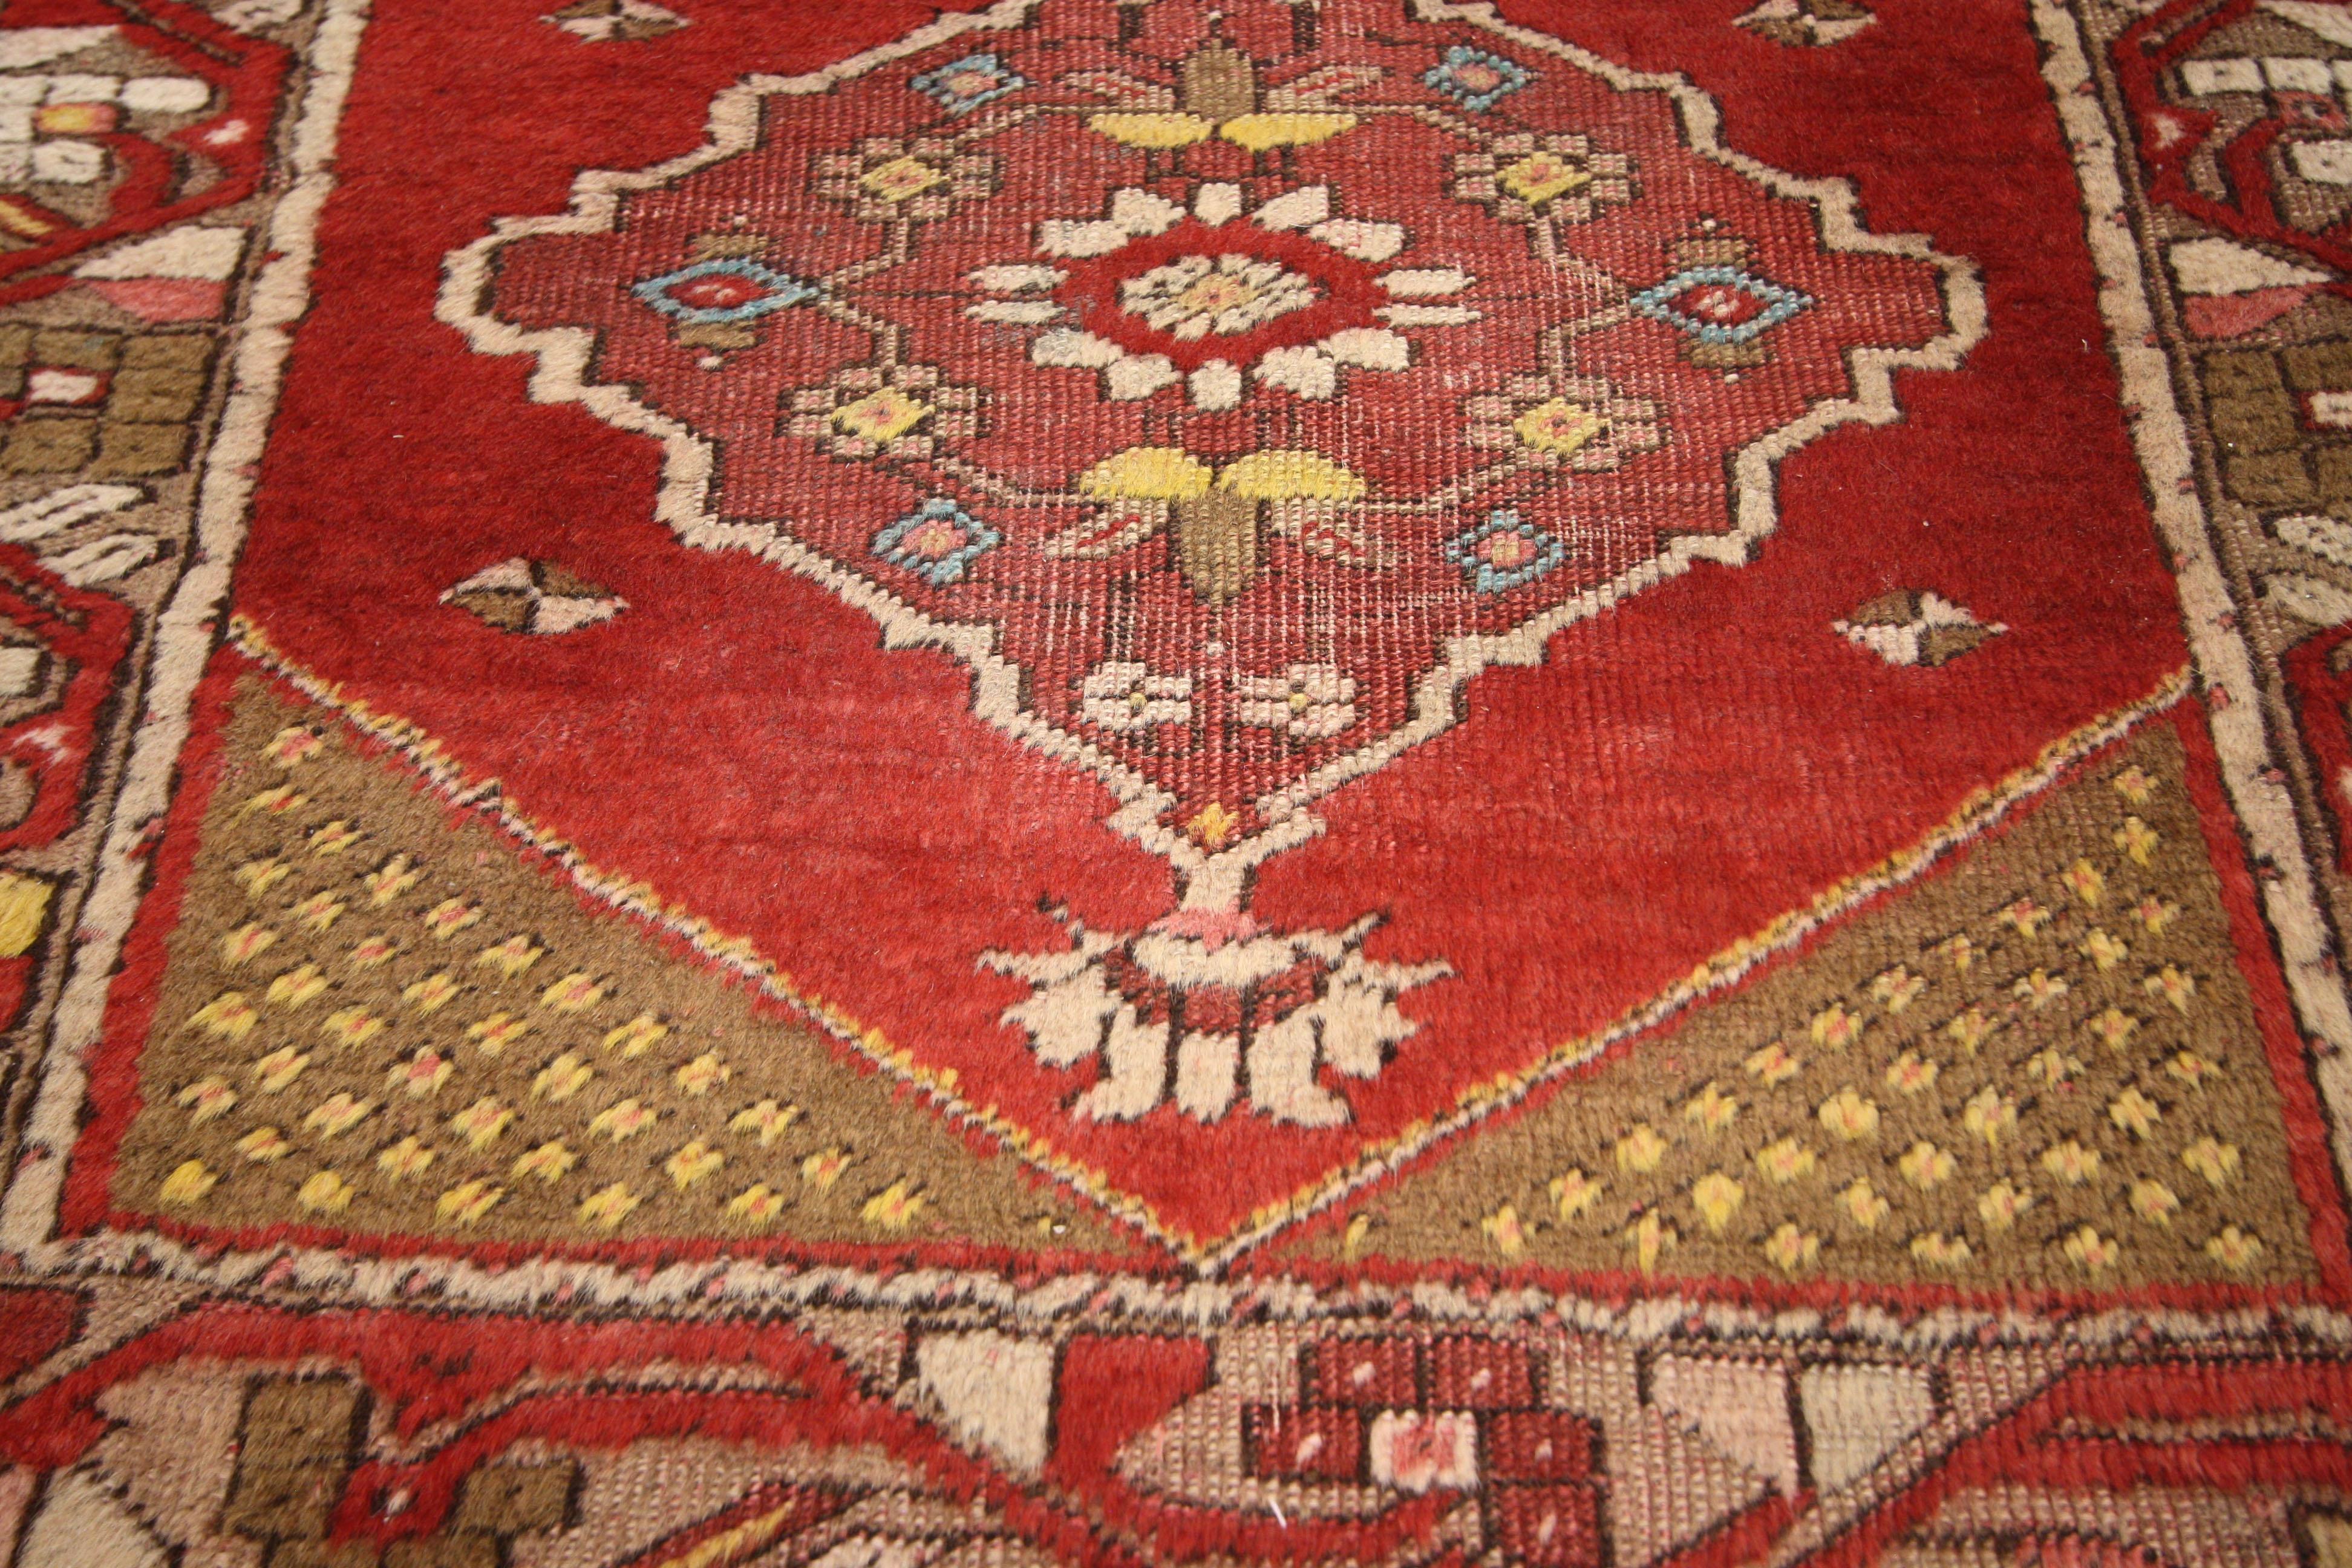 52348 Distressed Vintage Turkish Oushak Accent Rug with Rustic Jacobean Style, Foyer or Entry Rug, Square Scatter Rug 02'03 x 02'04. Endlessly versatile and classically stylish, this hand knotted wool vintage Turkish Oushak accent rug is an absolute